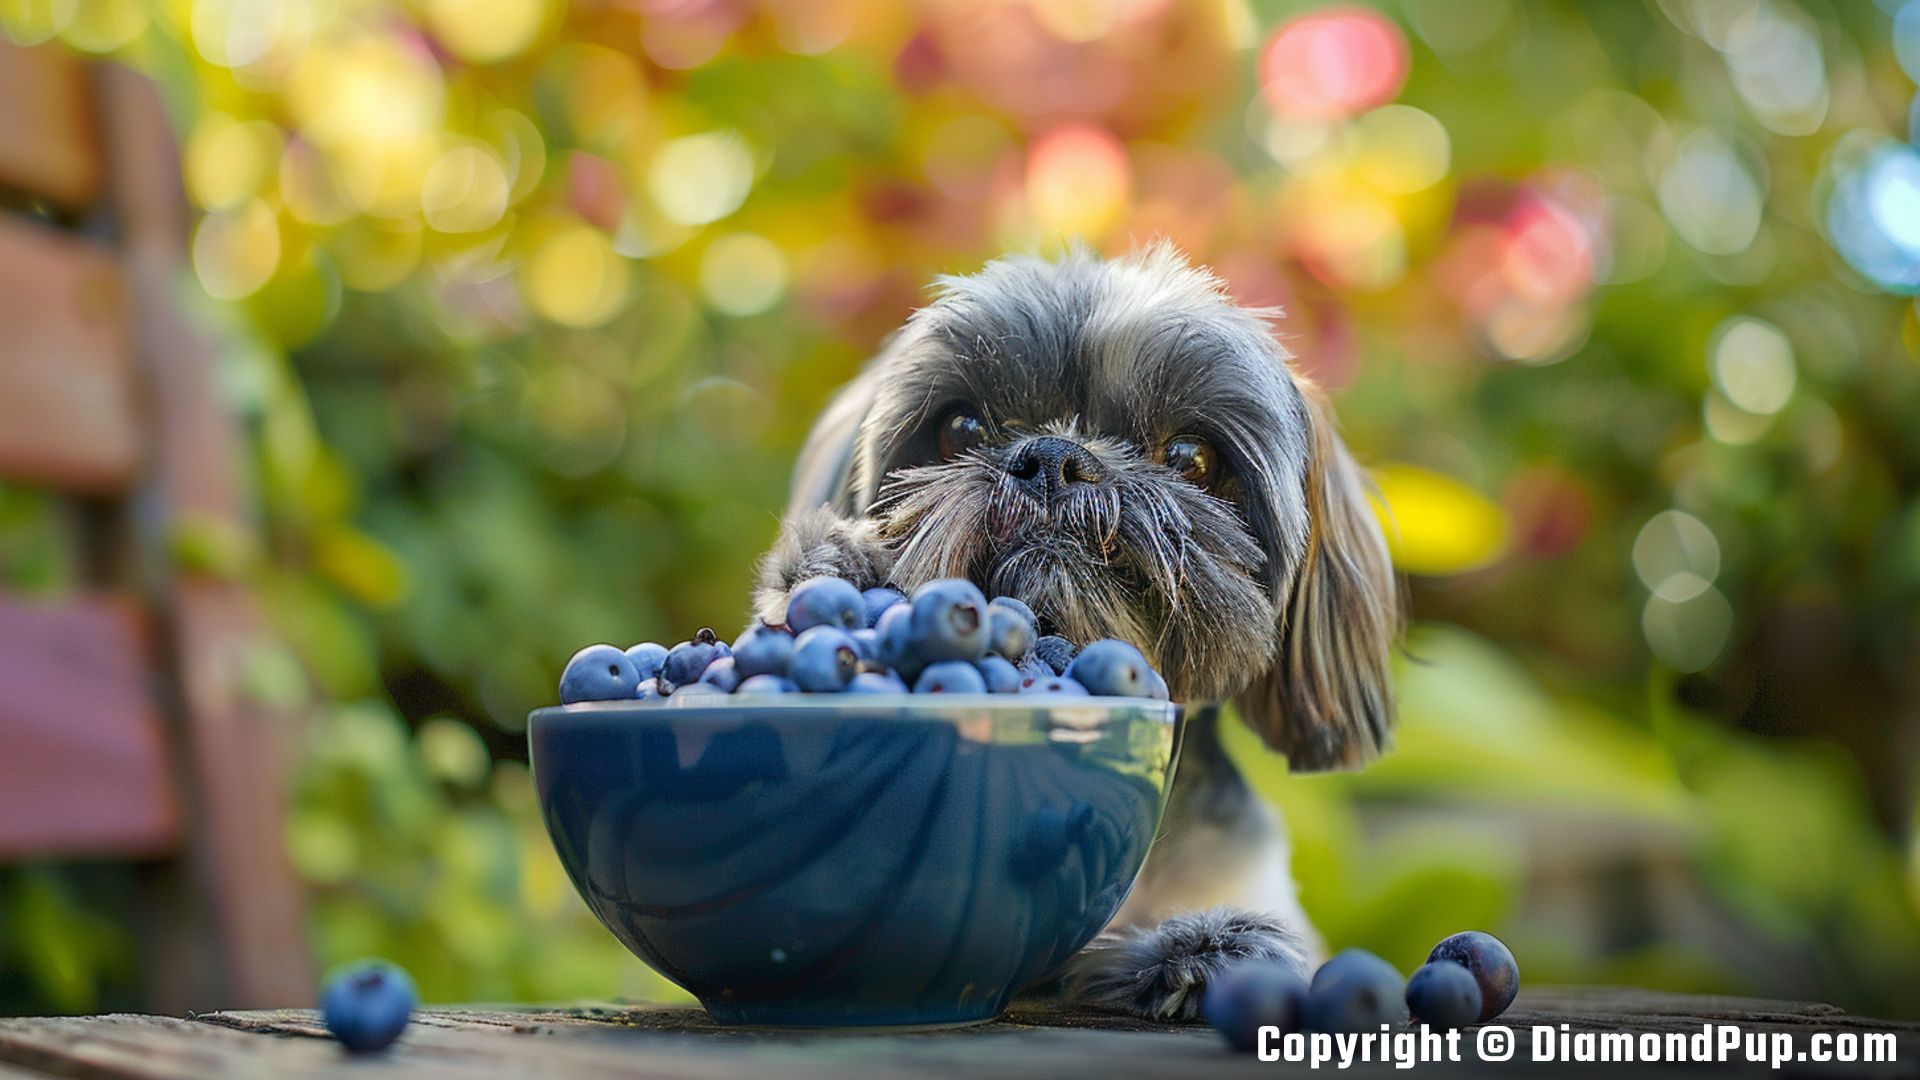 Photograph of an Adorable Shih Tzu Snacking on Blueberries